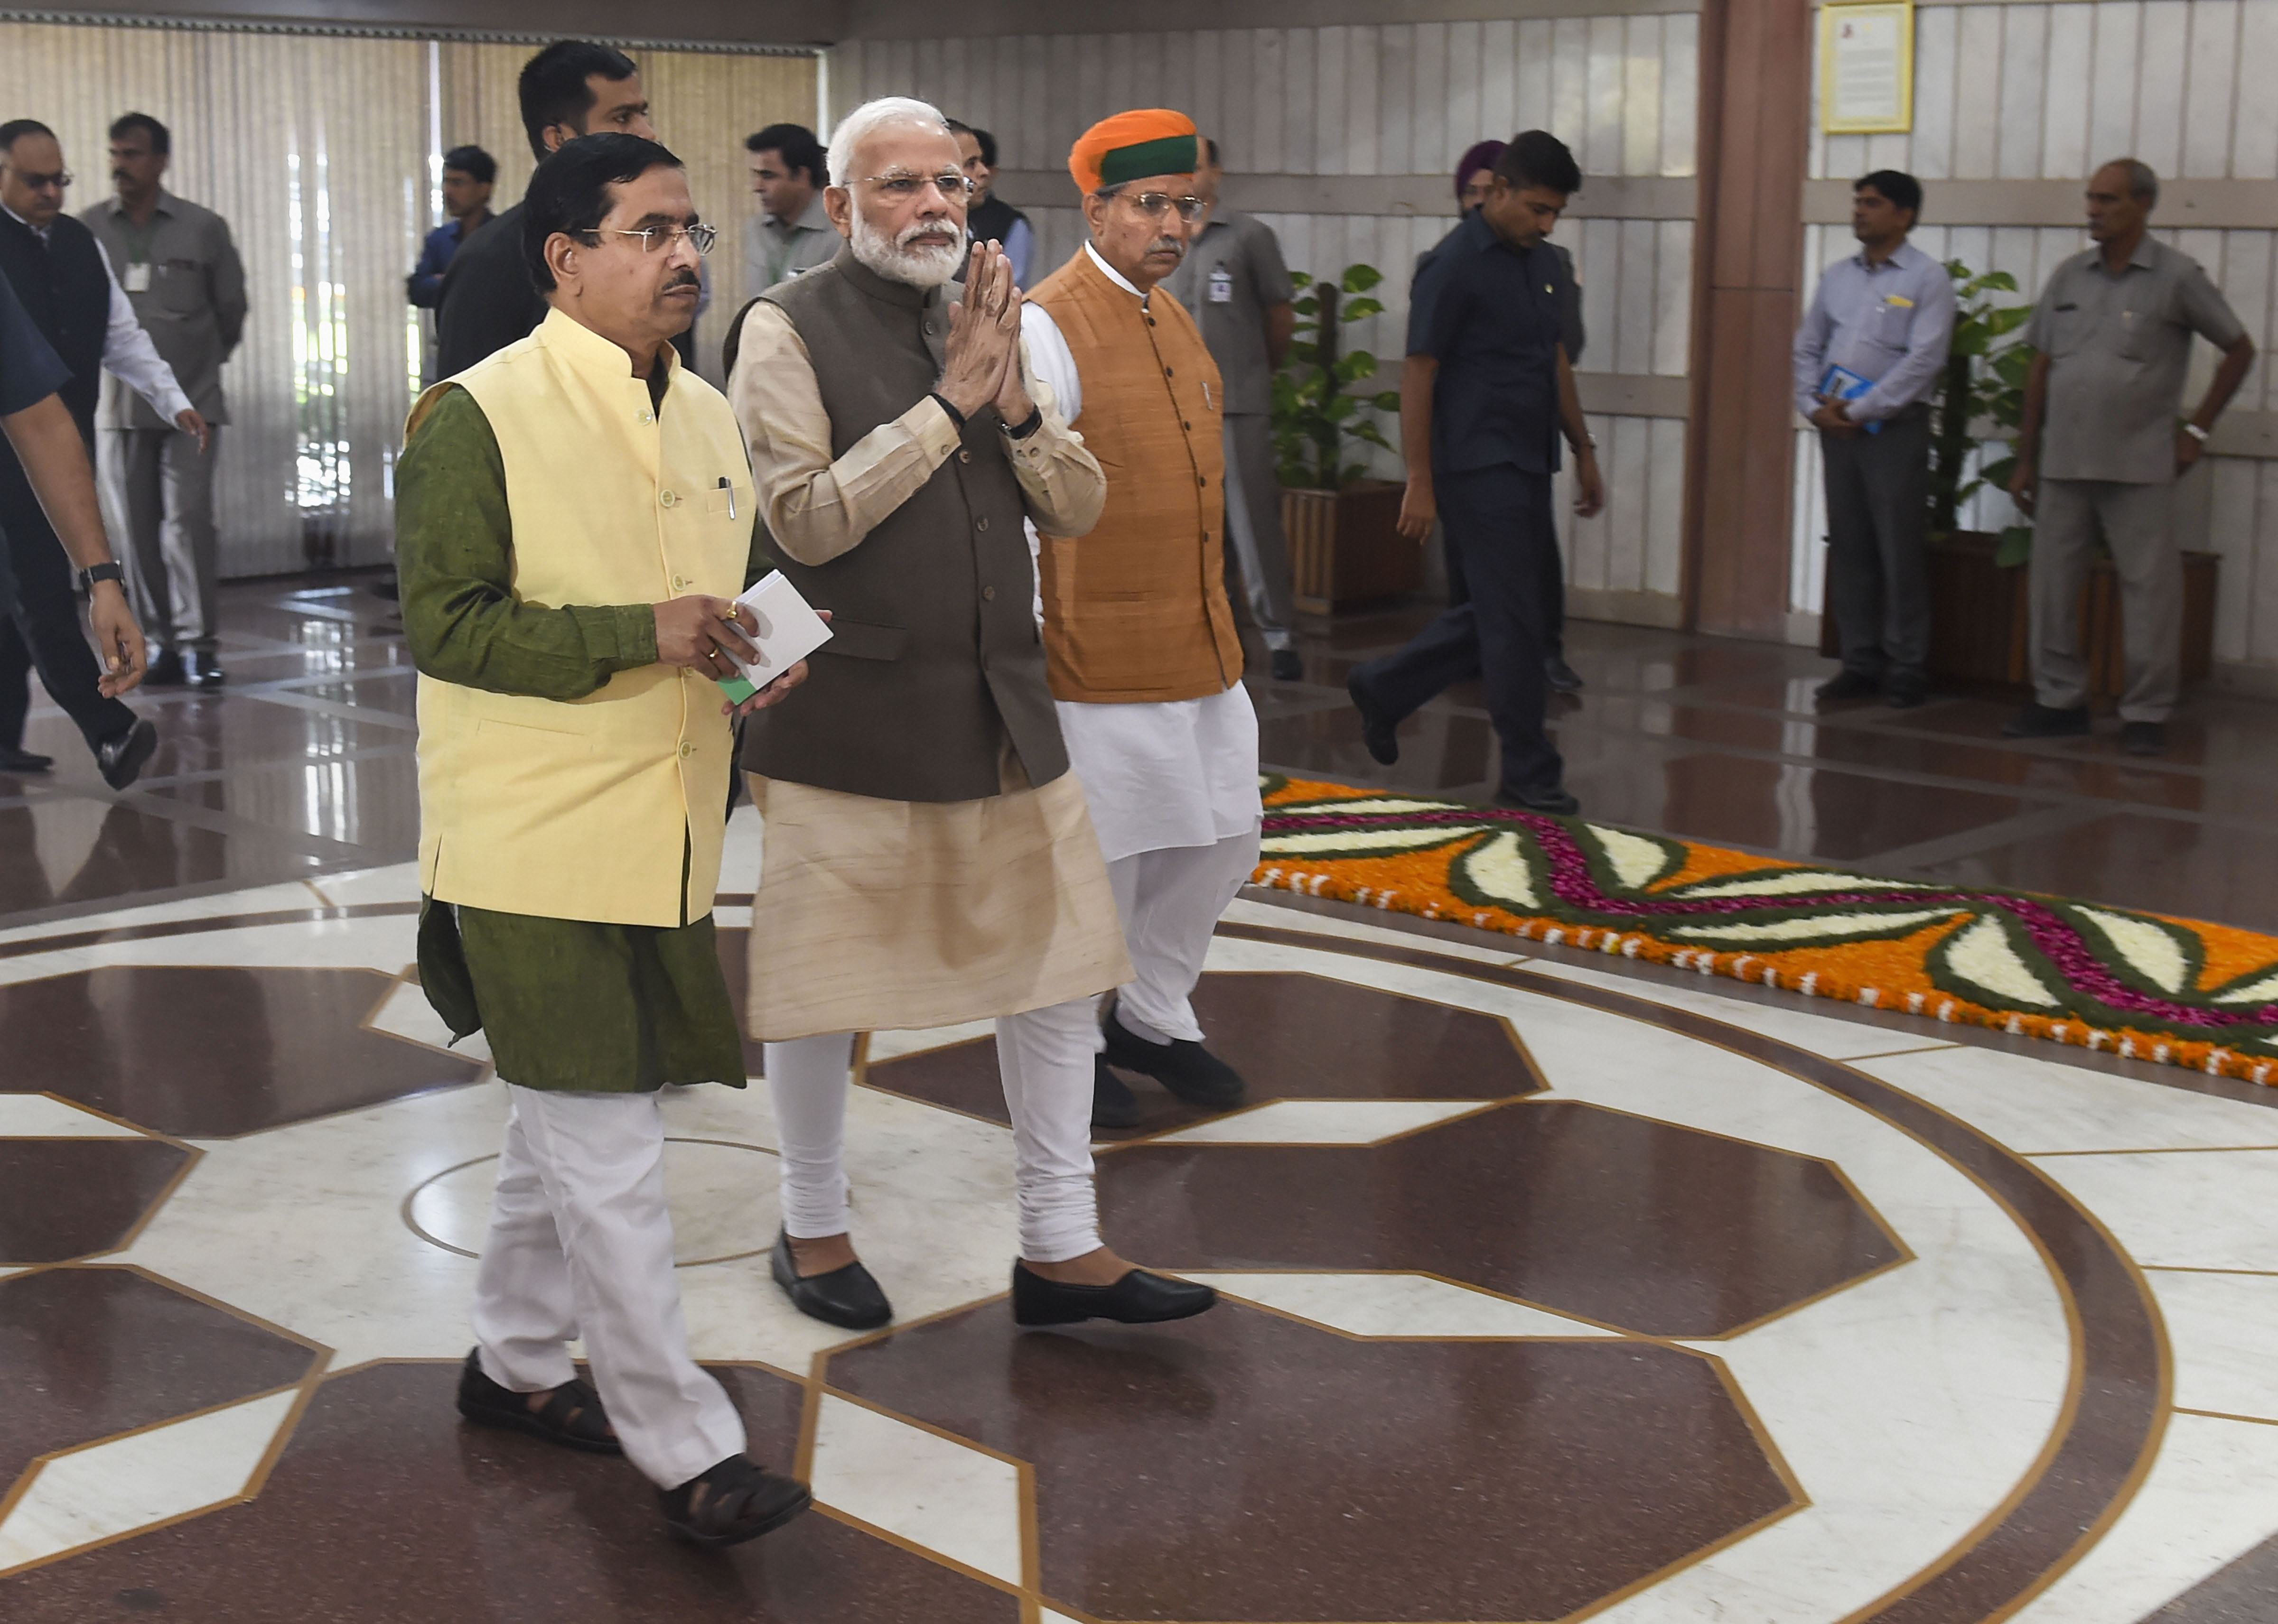 BJP leaders asked not to attack Thackerays, kindle reunion hopes